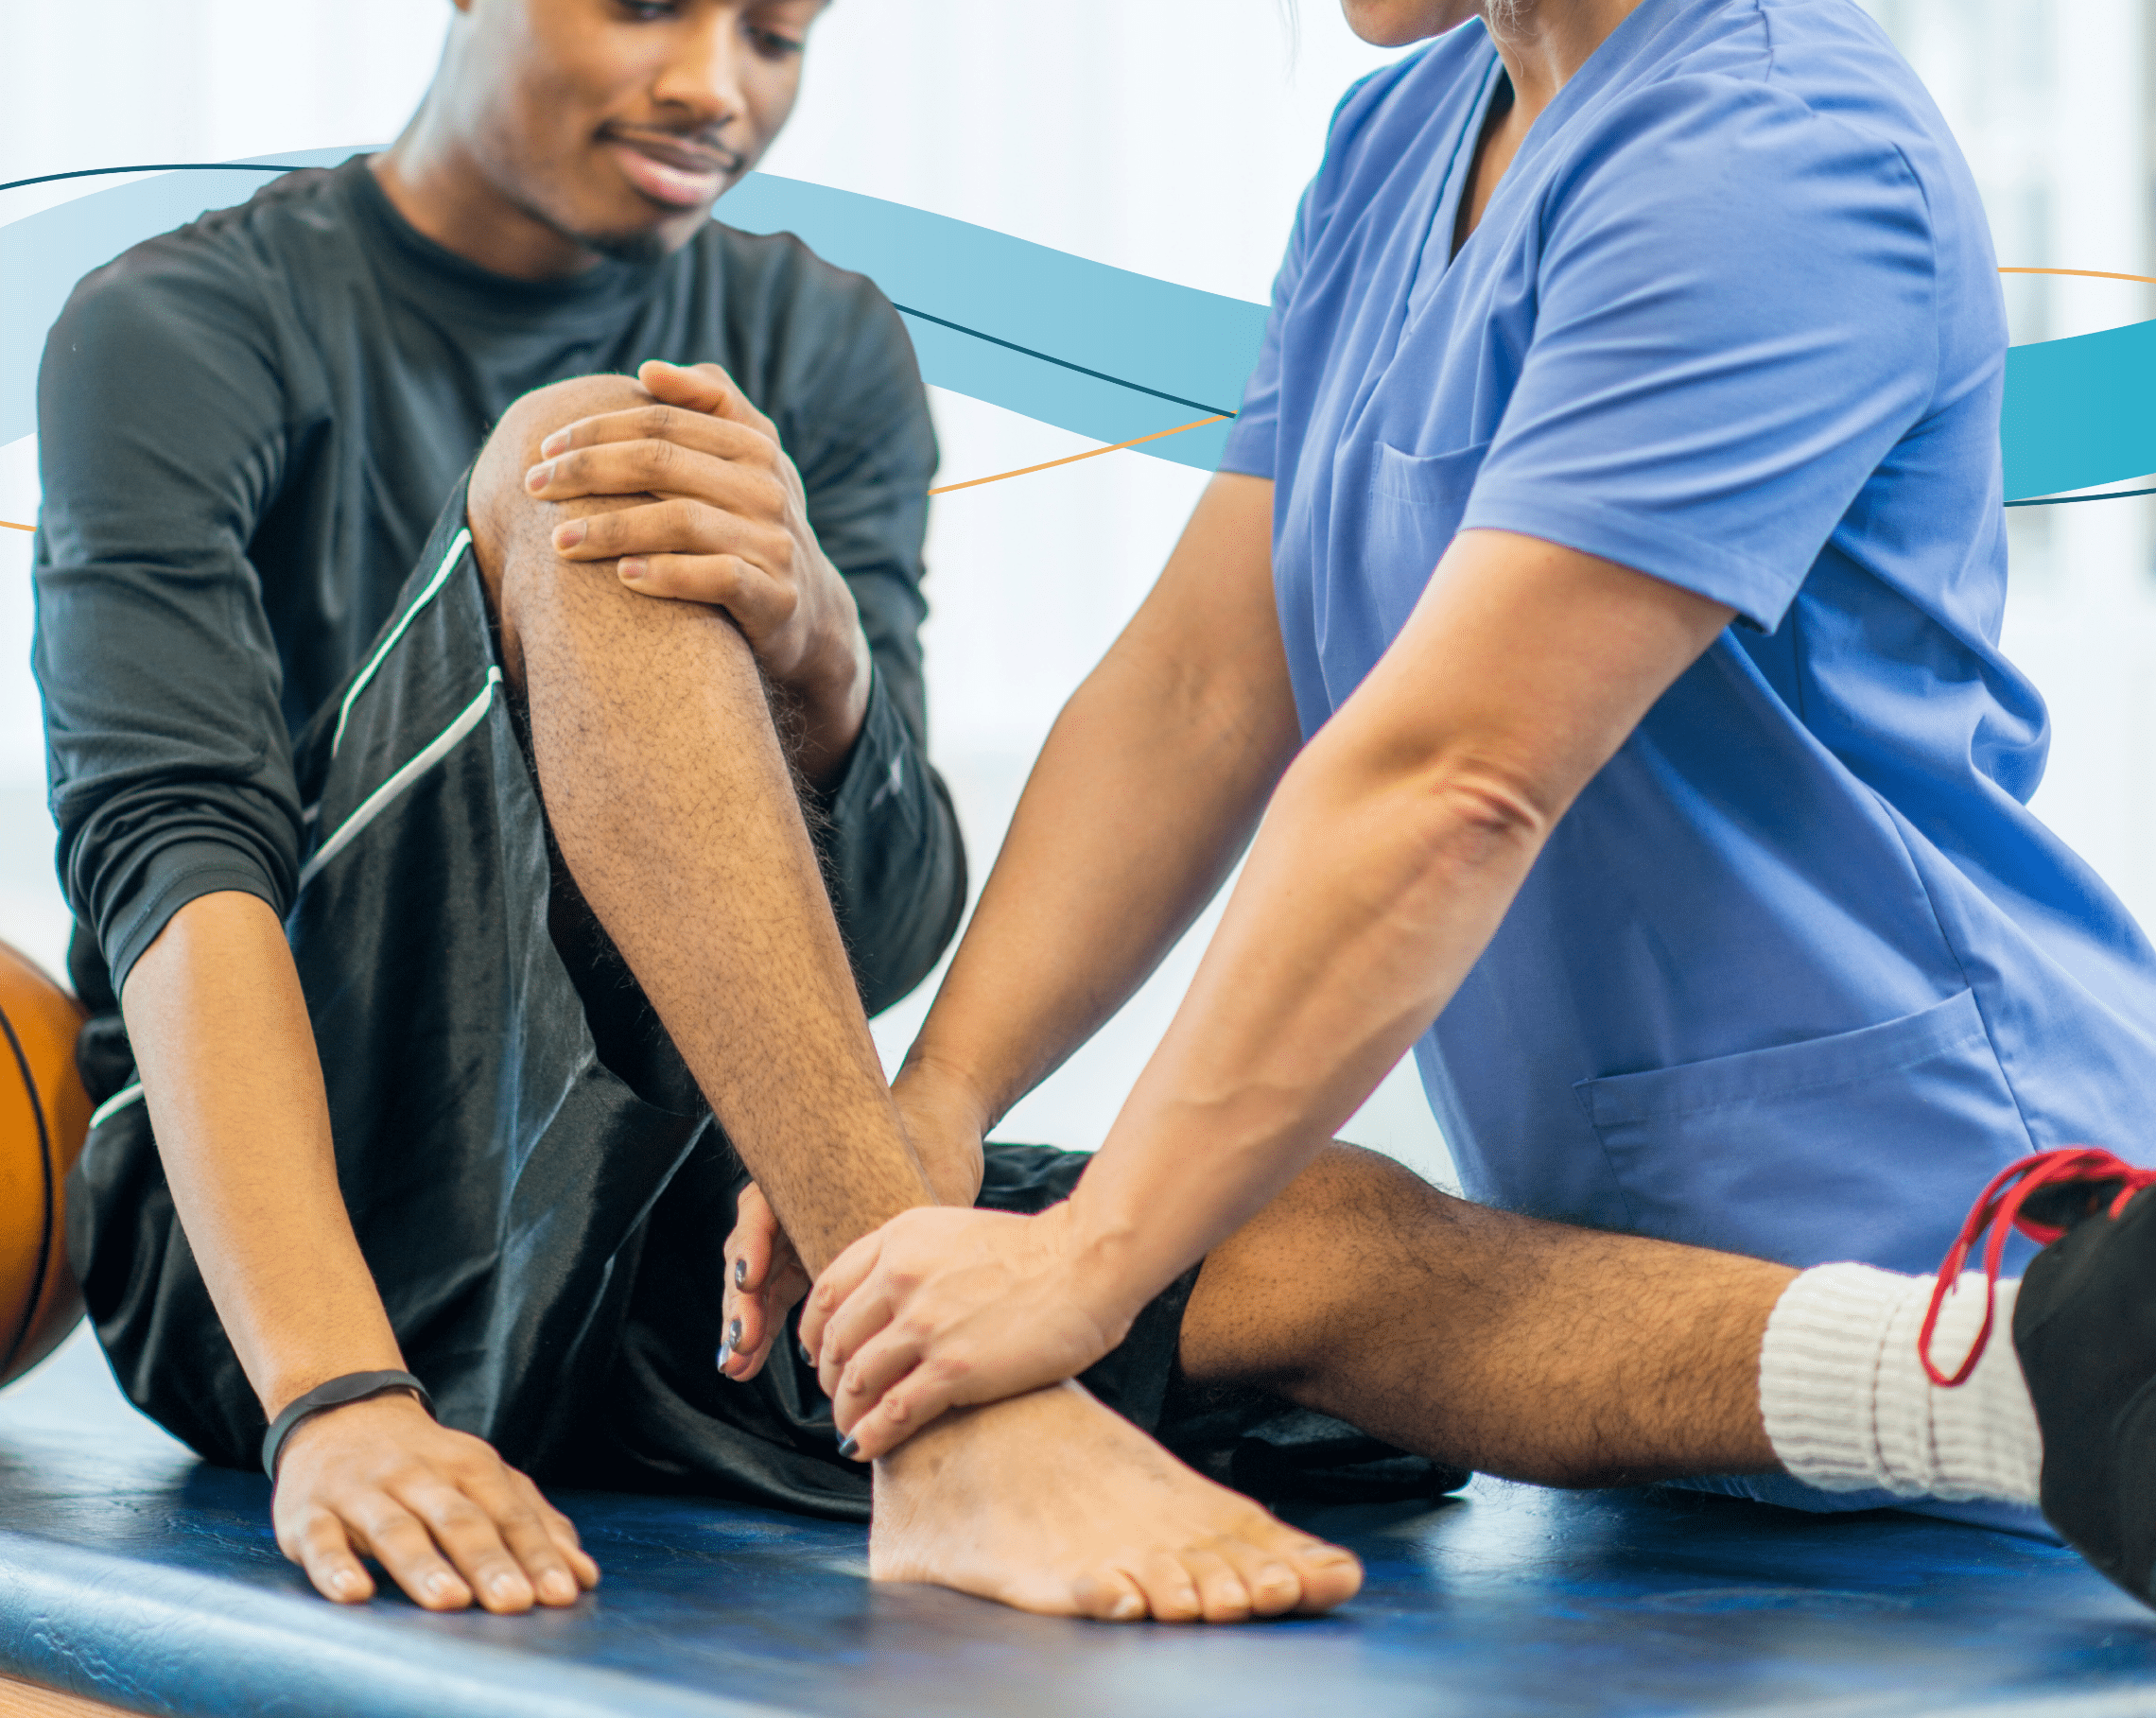 Physical therapist examining patients foot